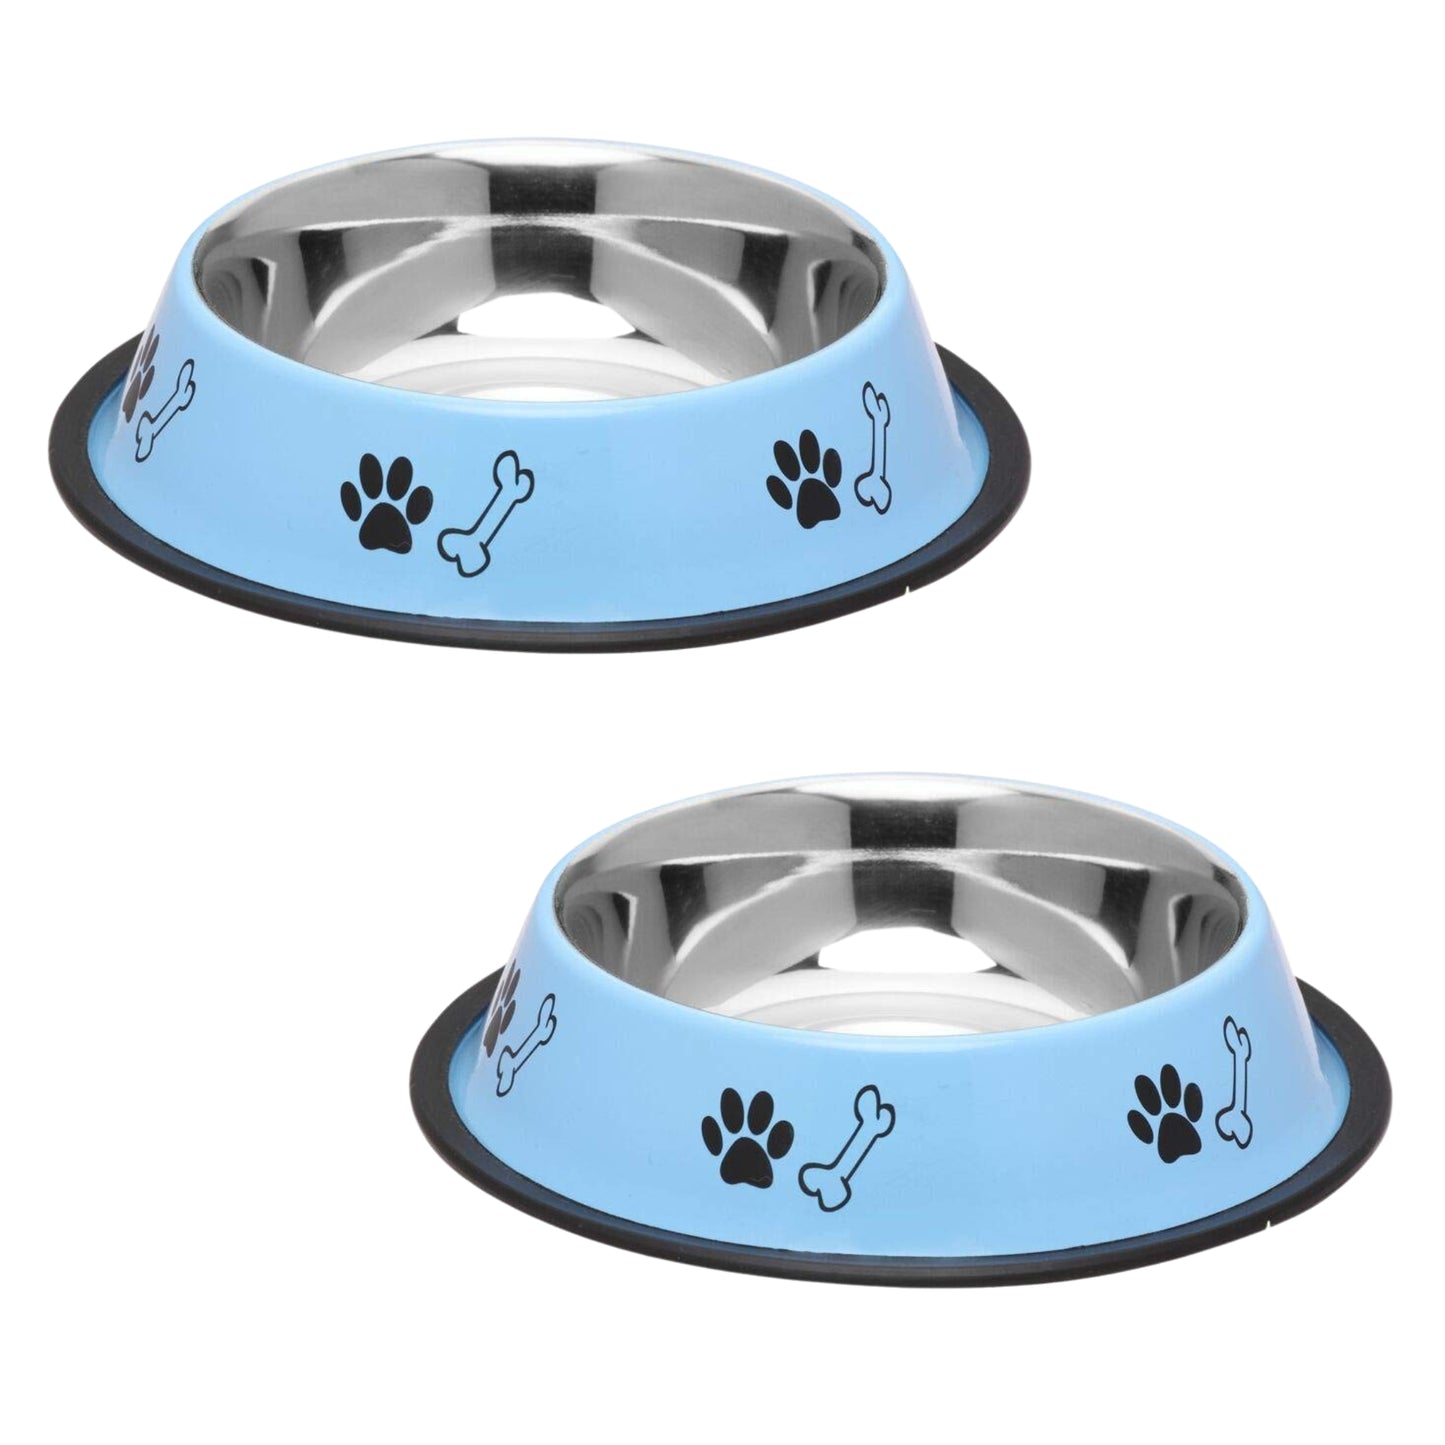 Foodie Puppies Printed Steel Bowl for Pets - 1800ml (SkyBlue), Pack of 2